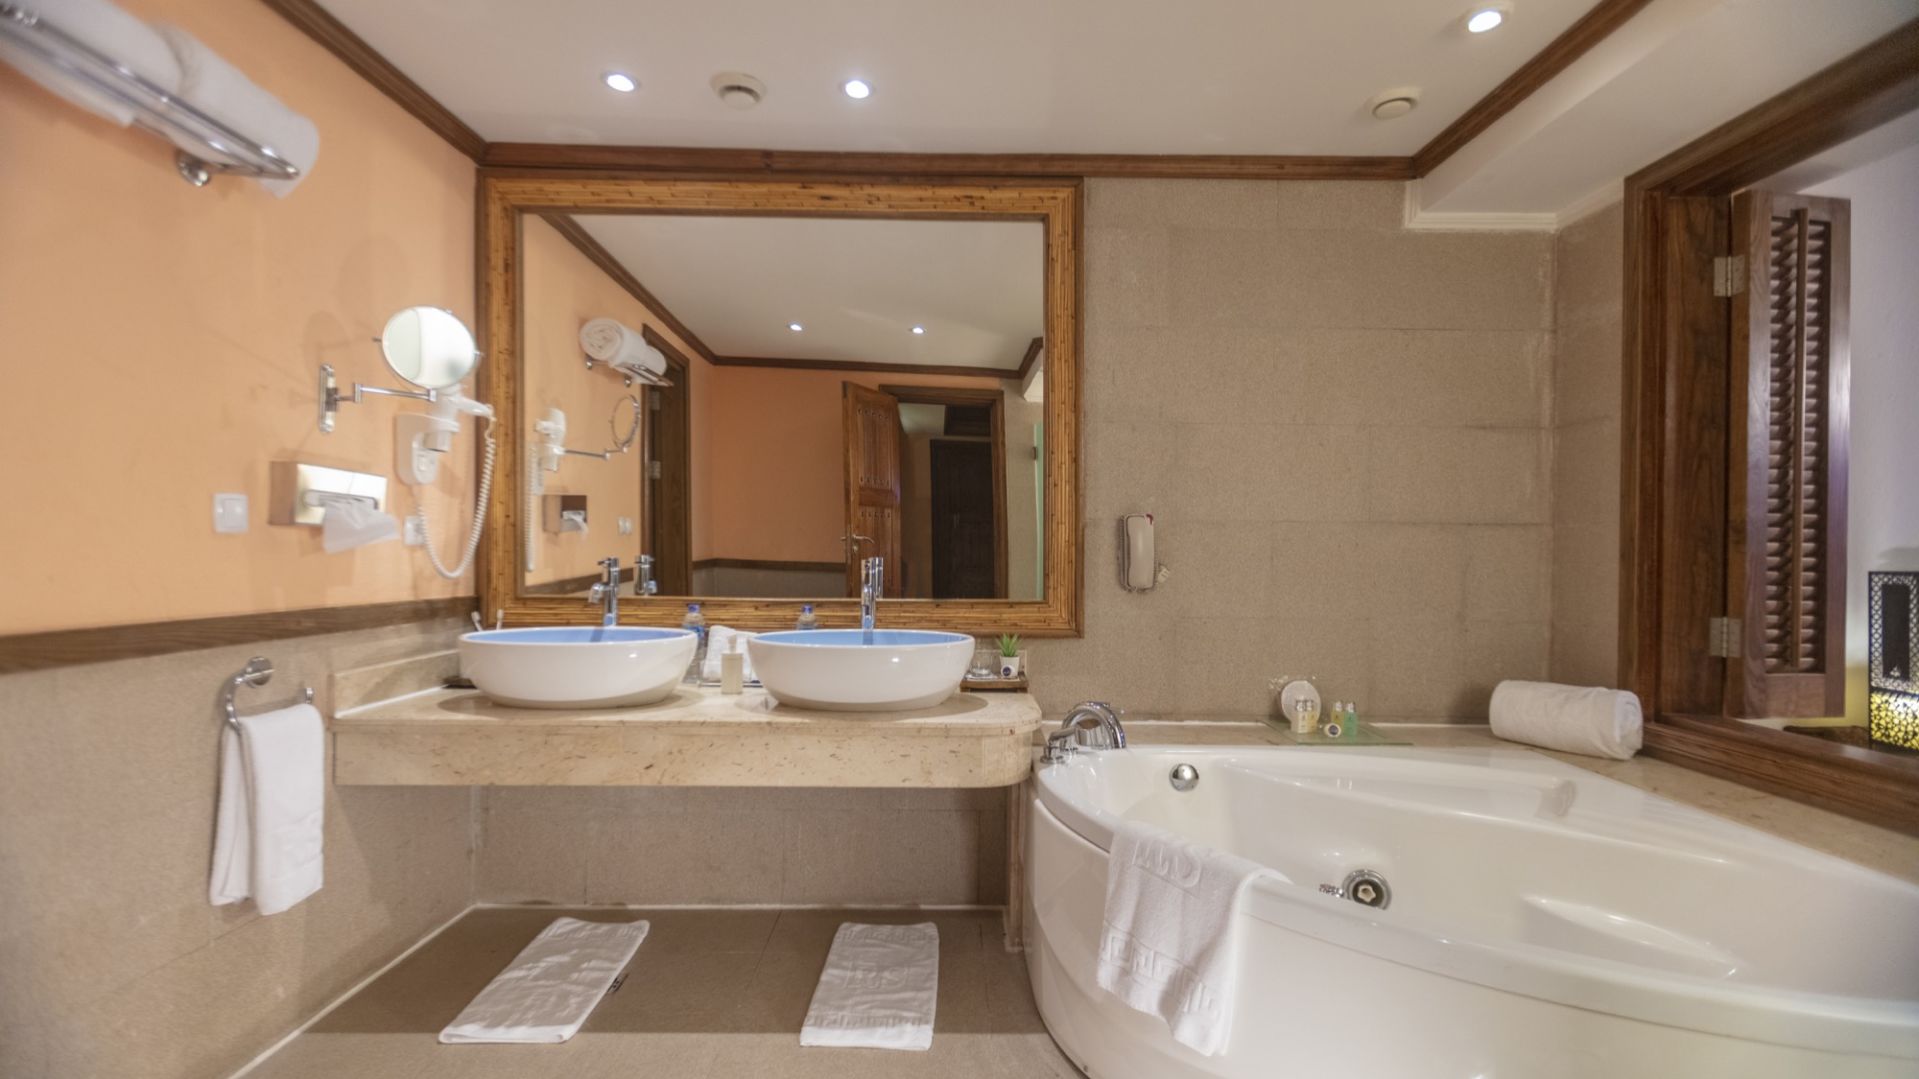 A Double Sink And Large Mirror